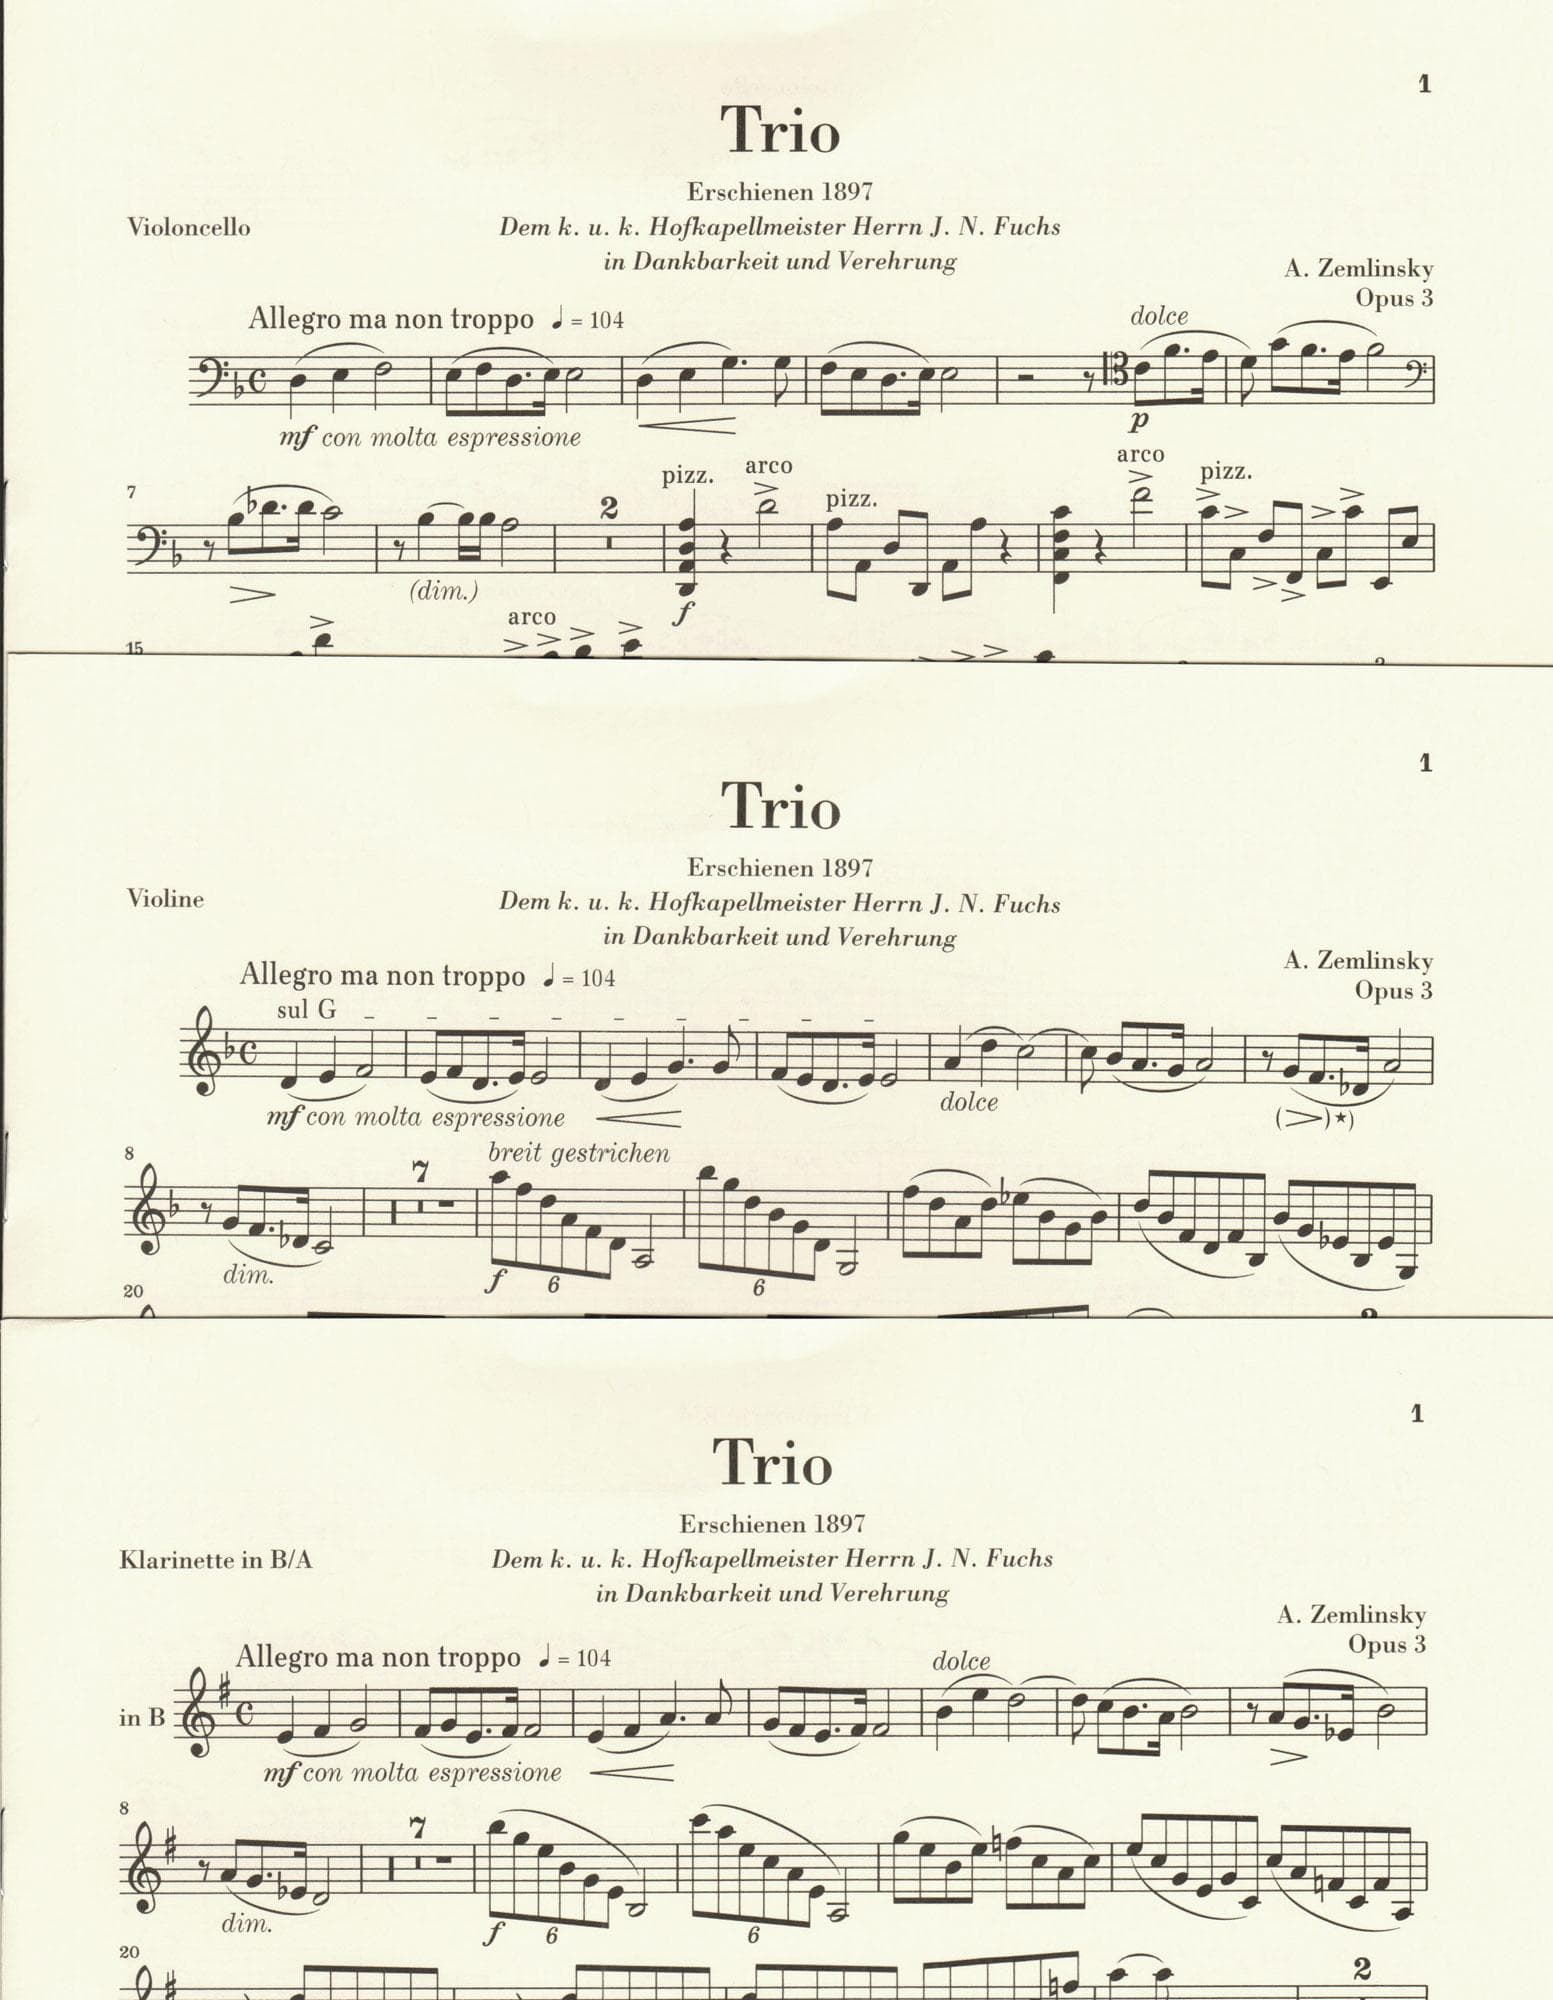 Zemlinsky, Alexander - Trio in D minor, Opus 3 - for Violin or Clarinet, Cello, and Piano - edited by Dominik Rahmer - G Henle URTEXT